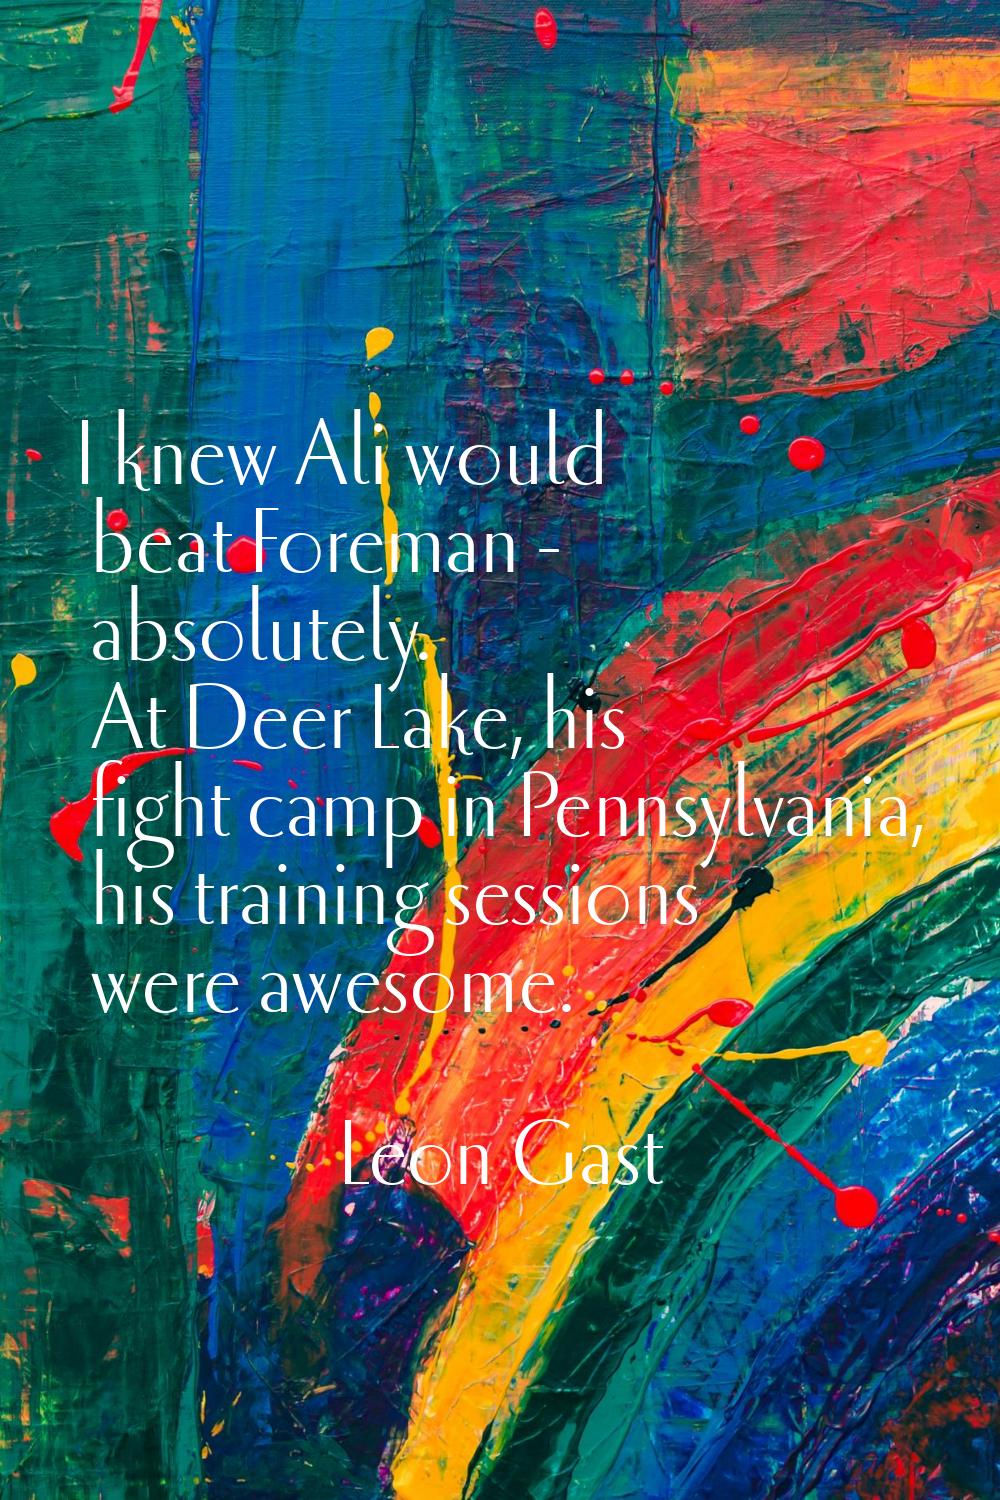 I knew Ali would beat Foreman - absolutely. At Deer Lake, his fight camp in Pennsylvania, his train